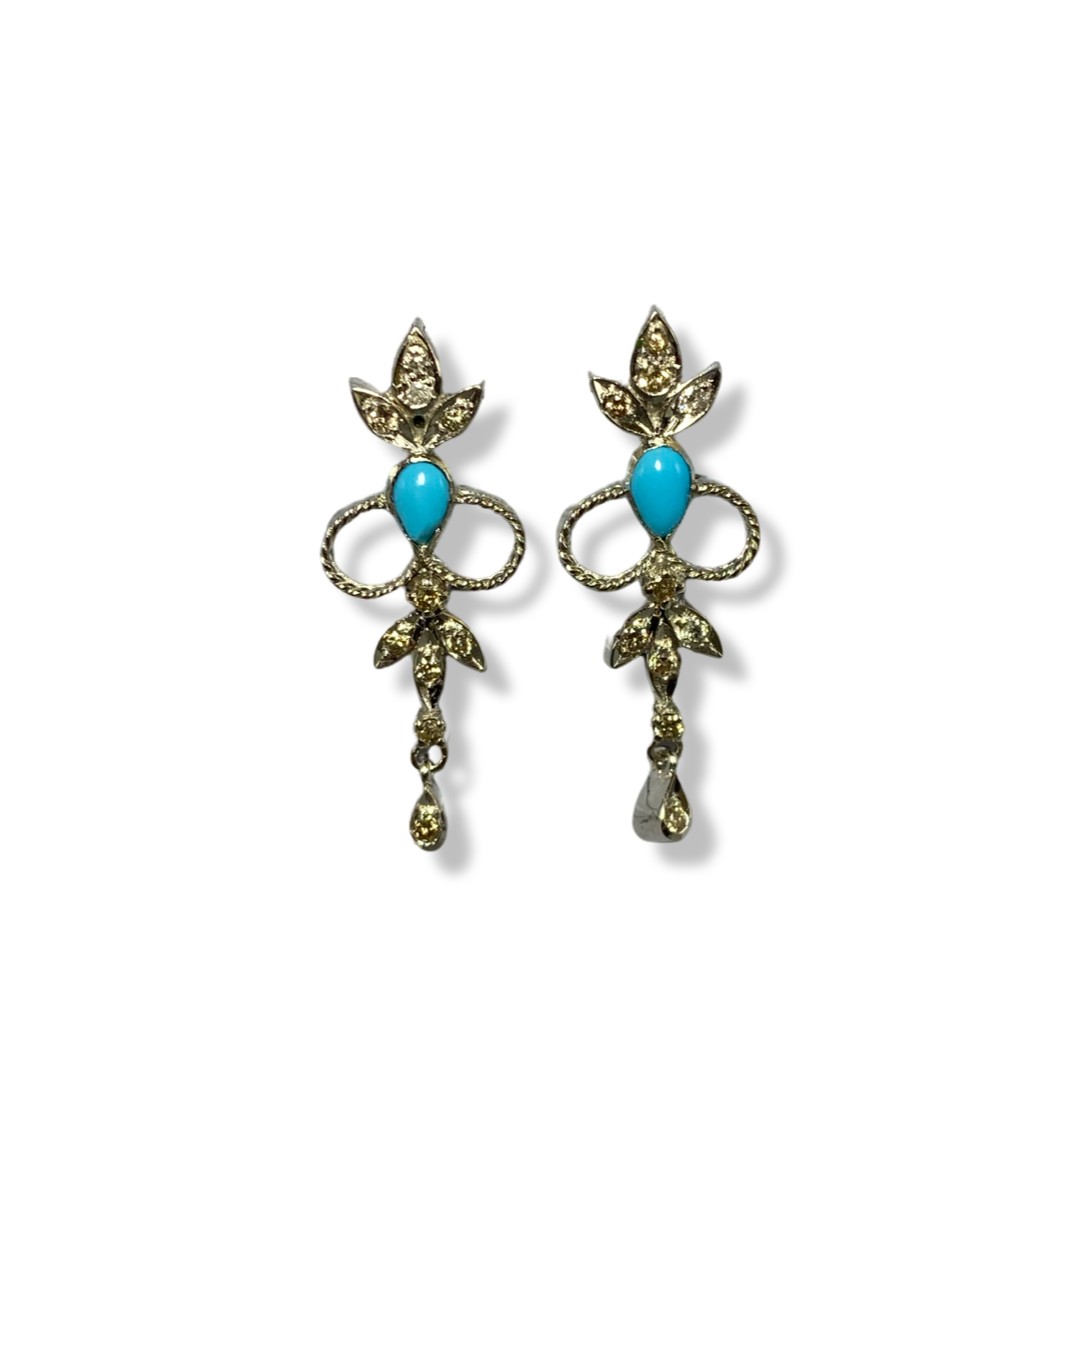 A Vintage 1960'S Diamond & Turquoise Suite Set in White Metal in original box weighing 298 g - Image 2 of 5